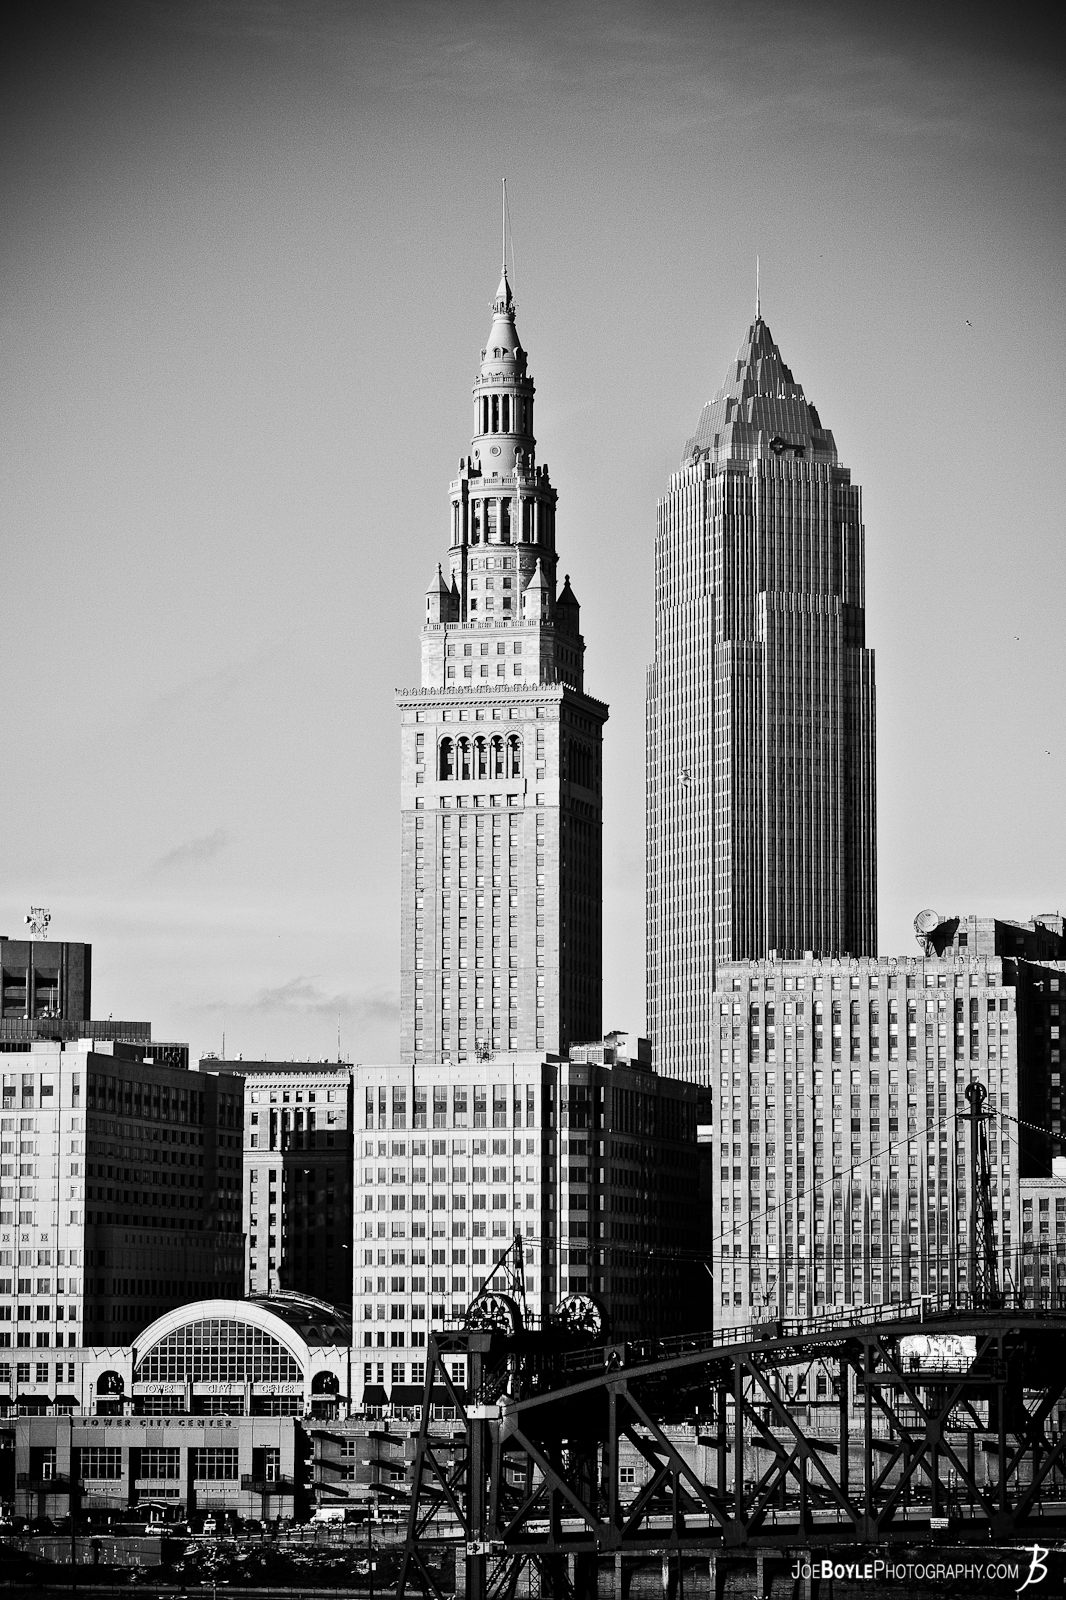  I took this image from the Hope Memorial Bridge. Featured here is the Terminal Tower and Key Tower. 